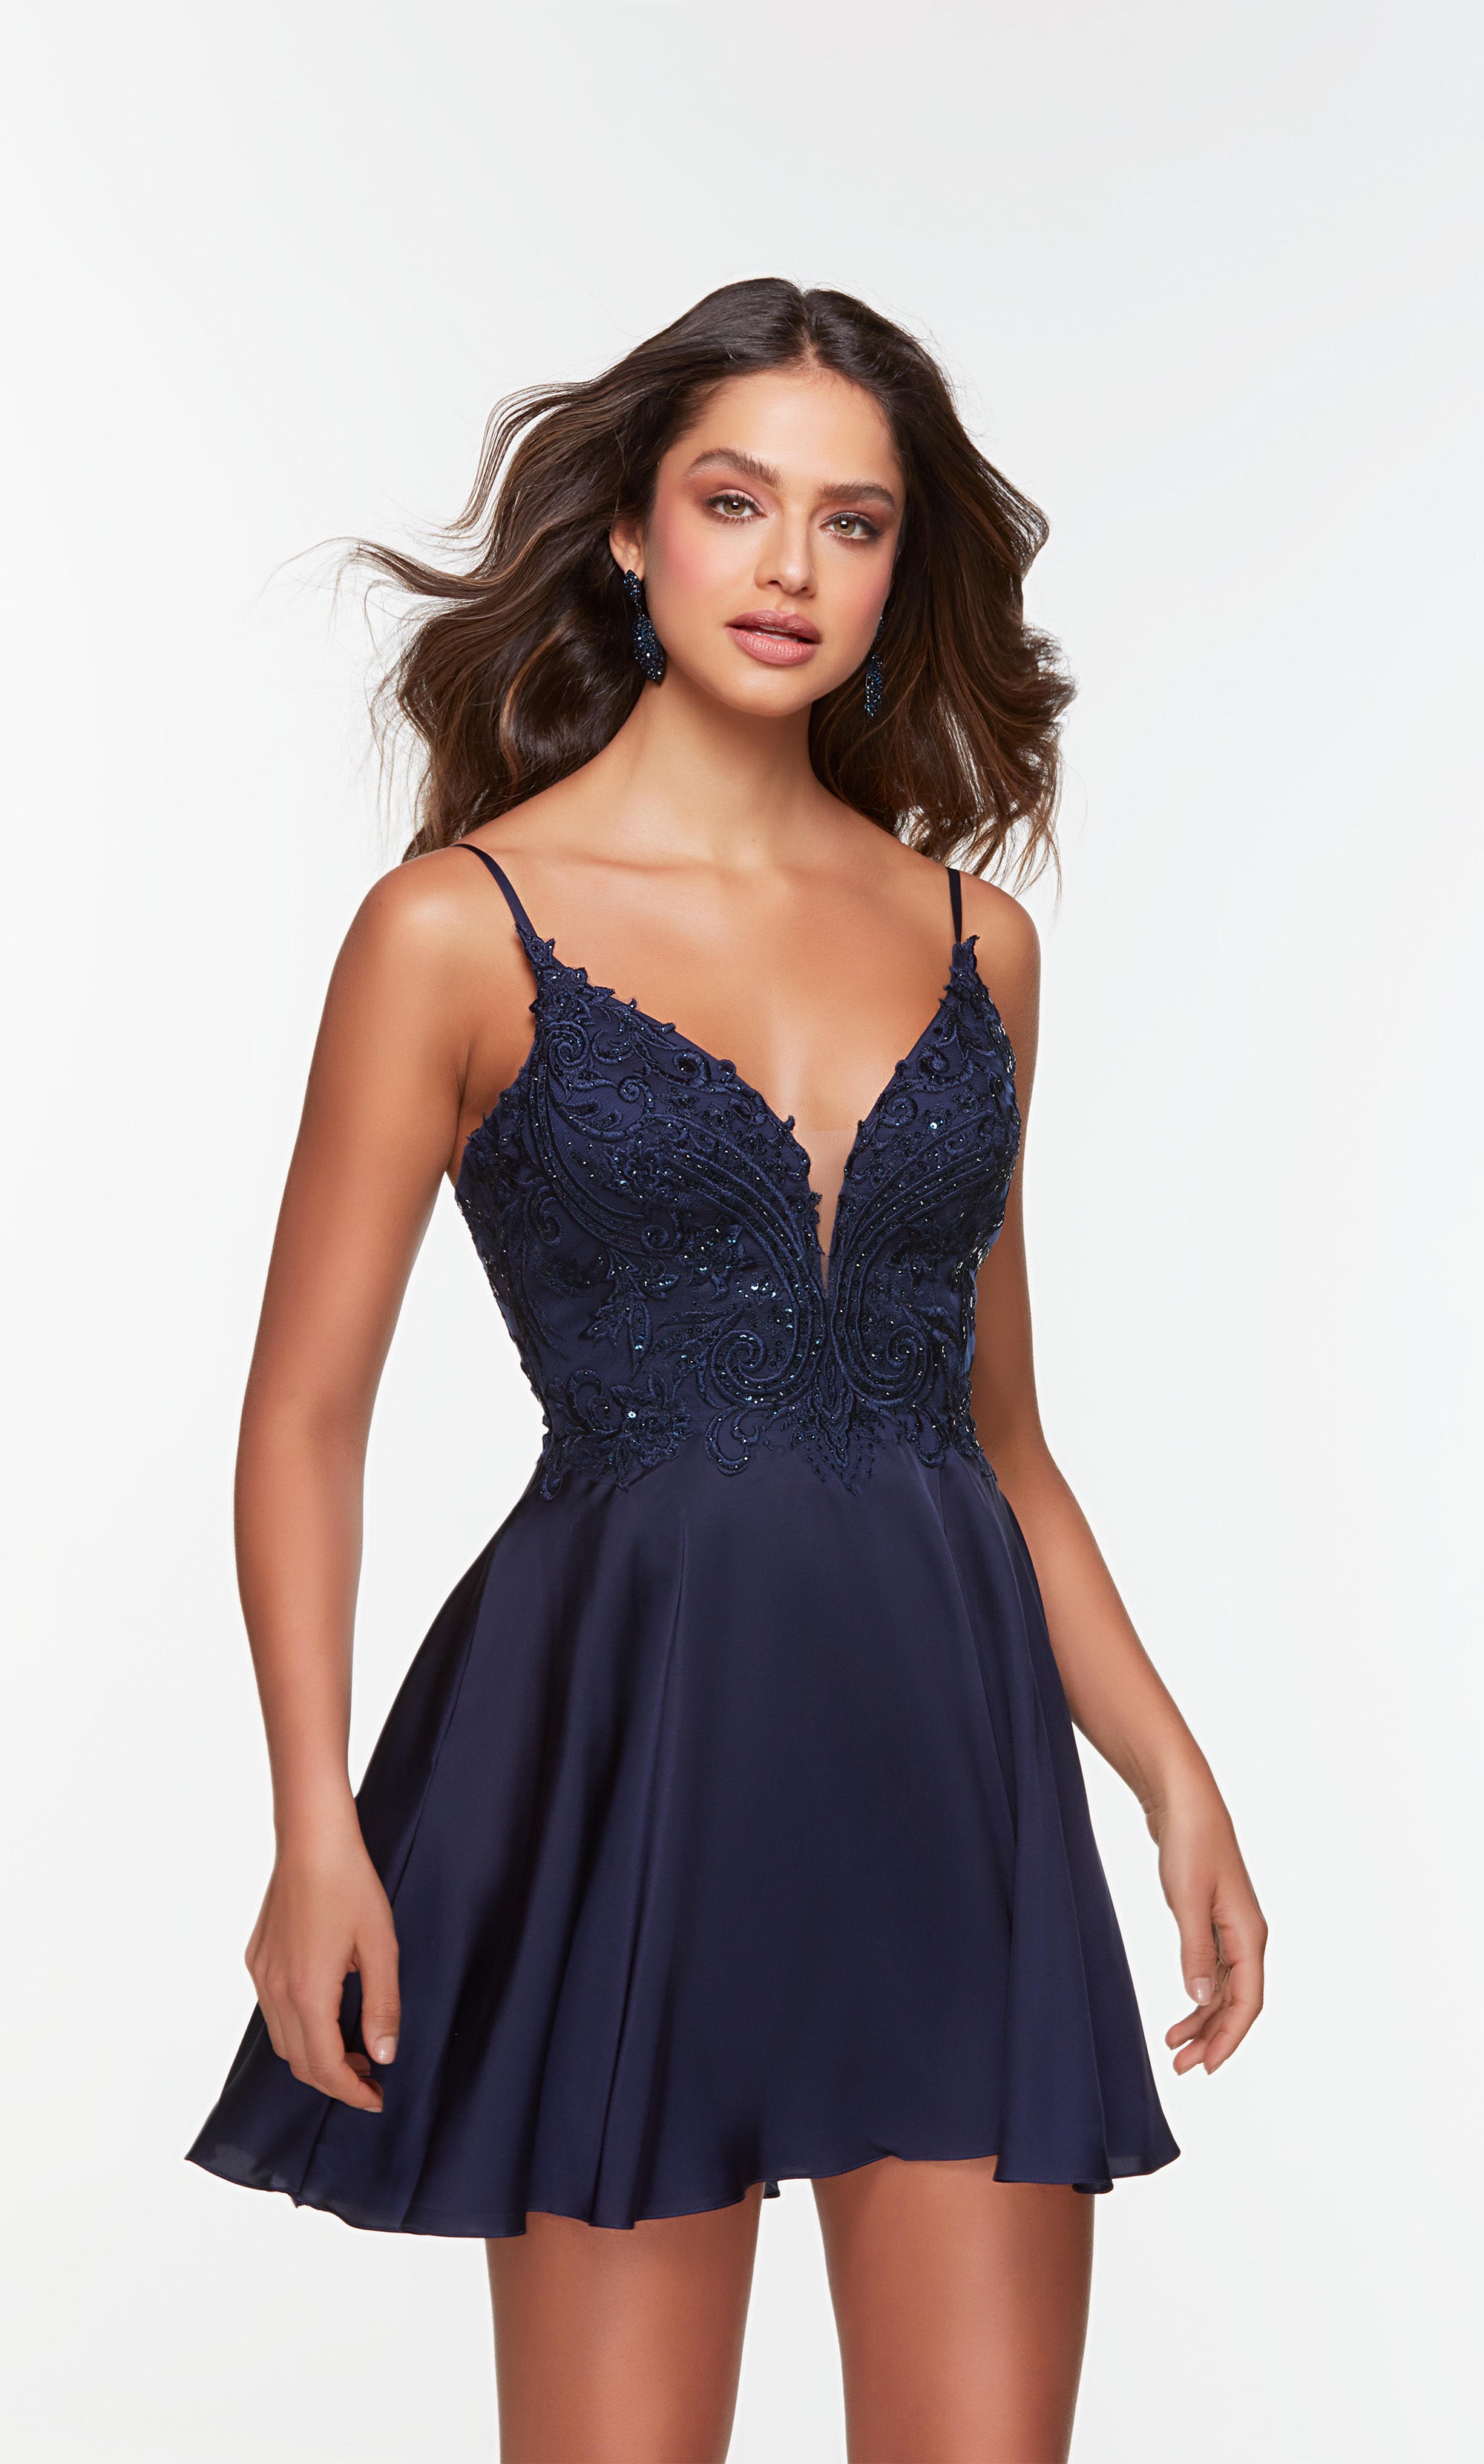 Short Navy Blue Embroidered-Bodice Homecoming Dress, 43% OFF